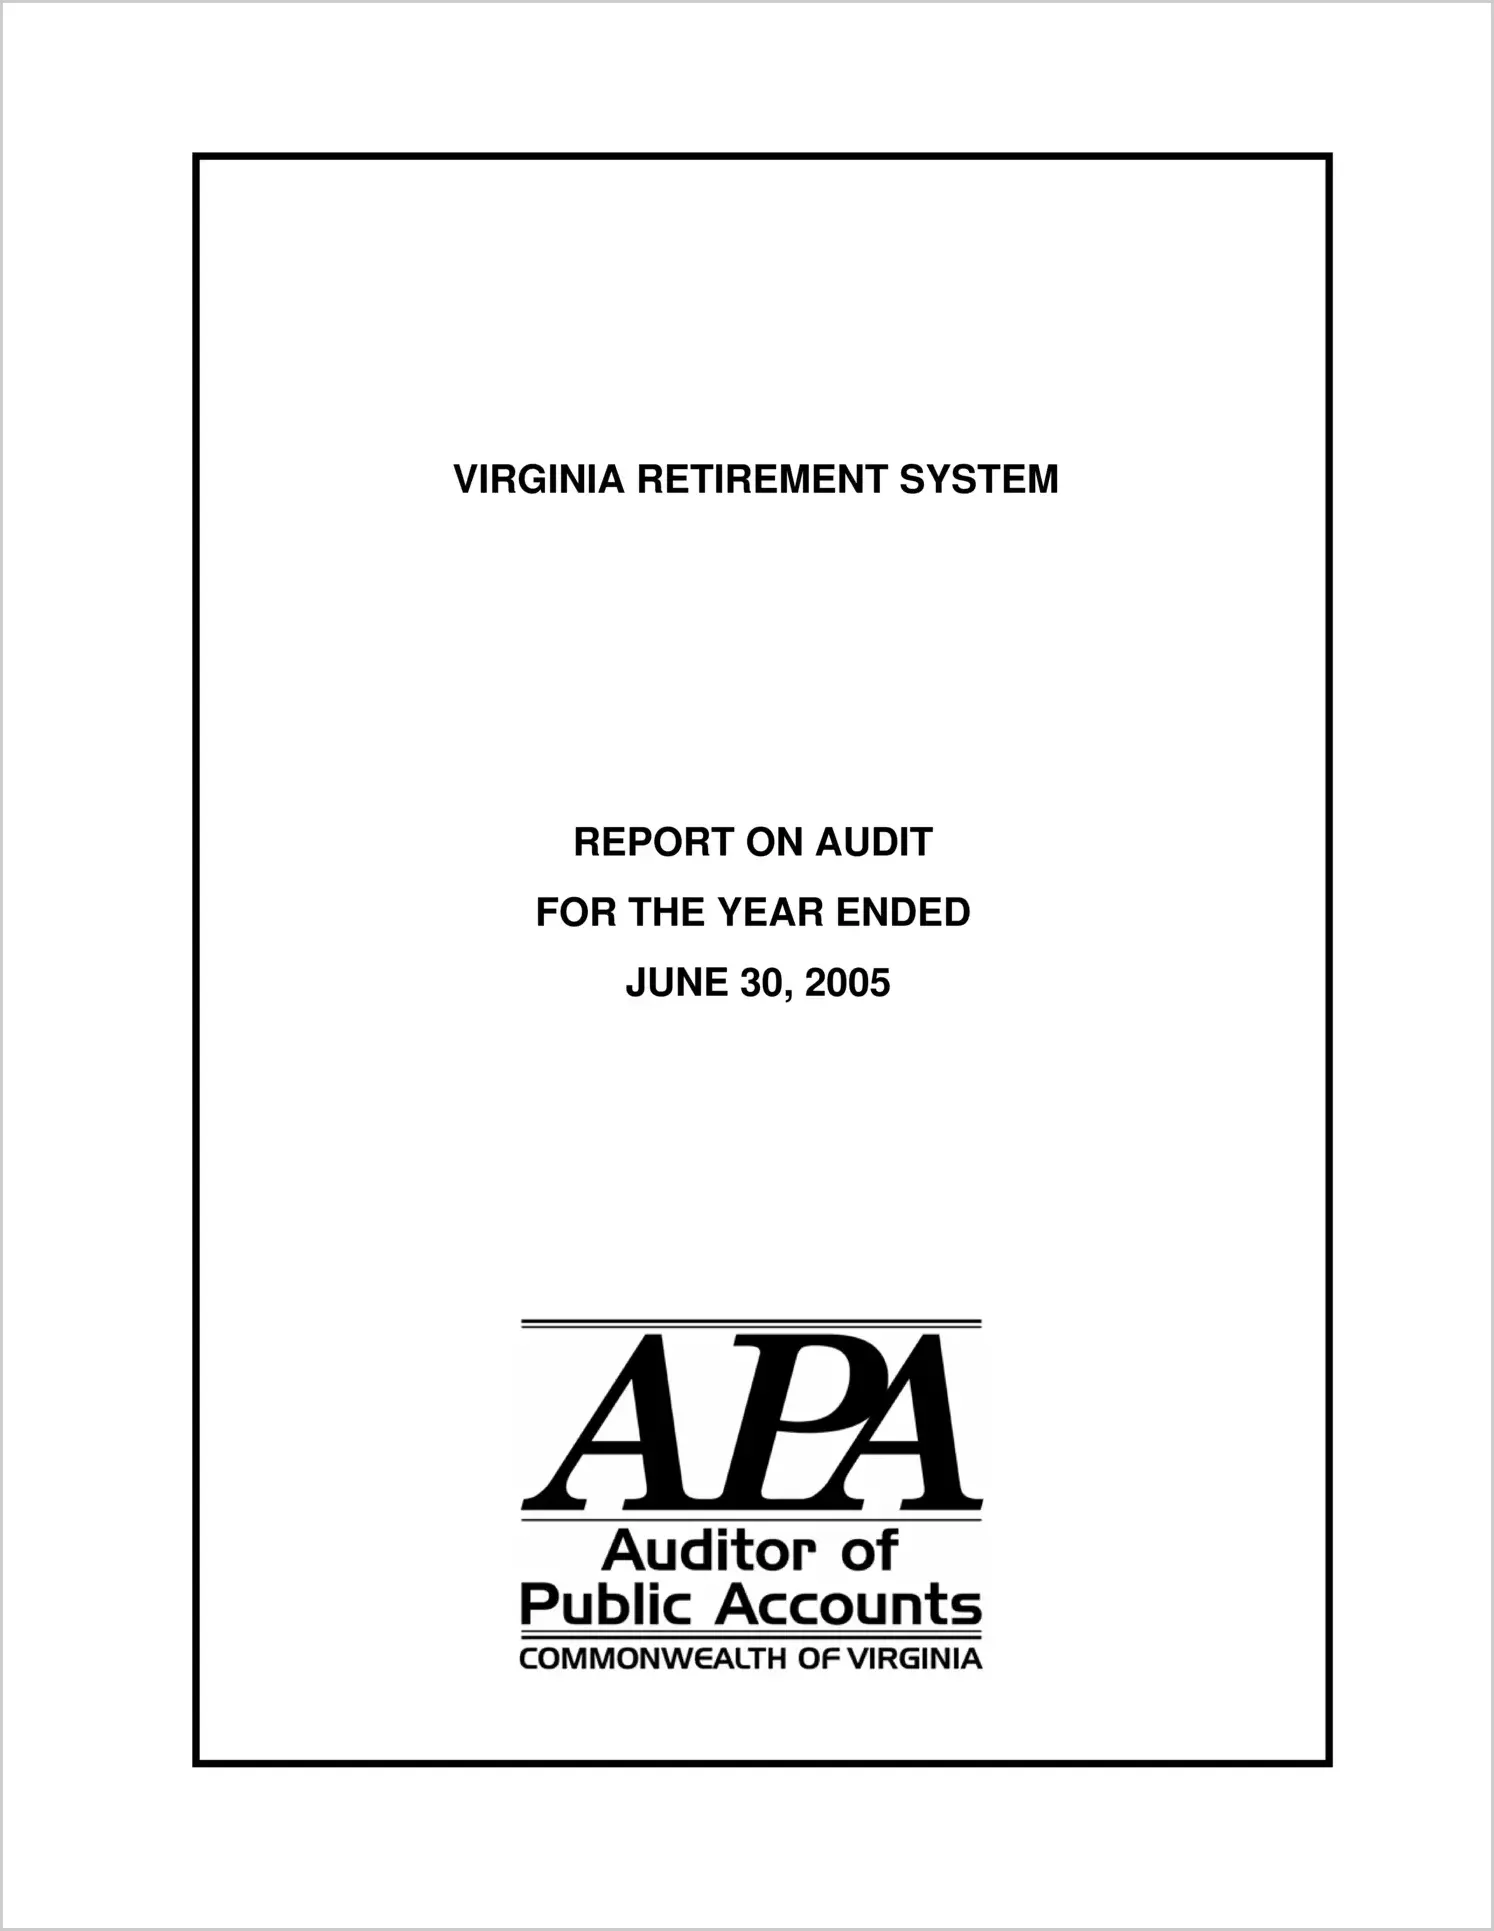 Virginia Retirement System for the year ended June 30, 2005